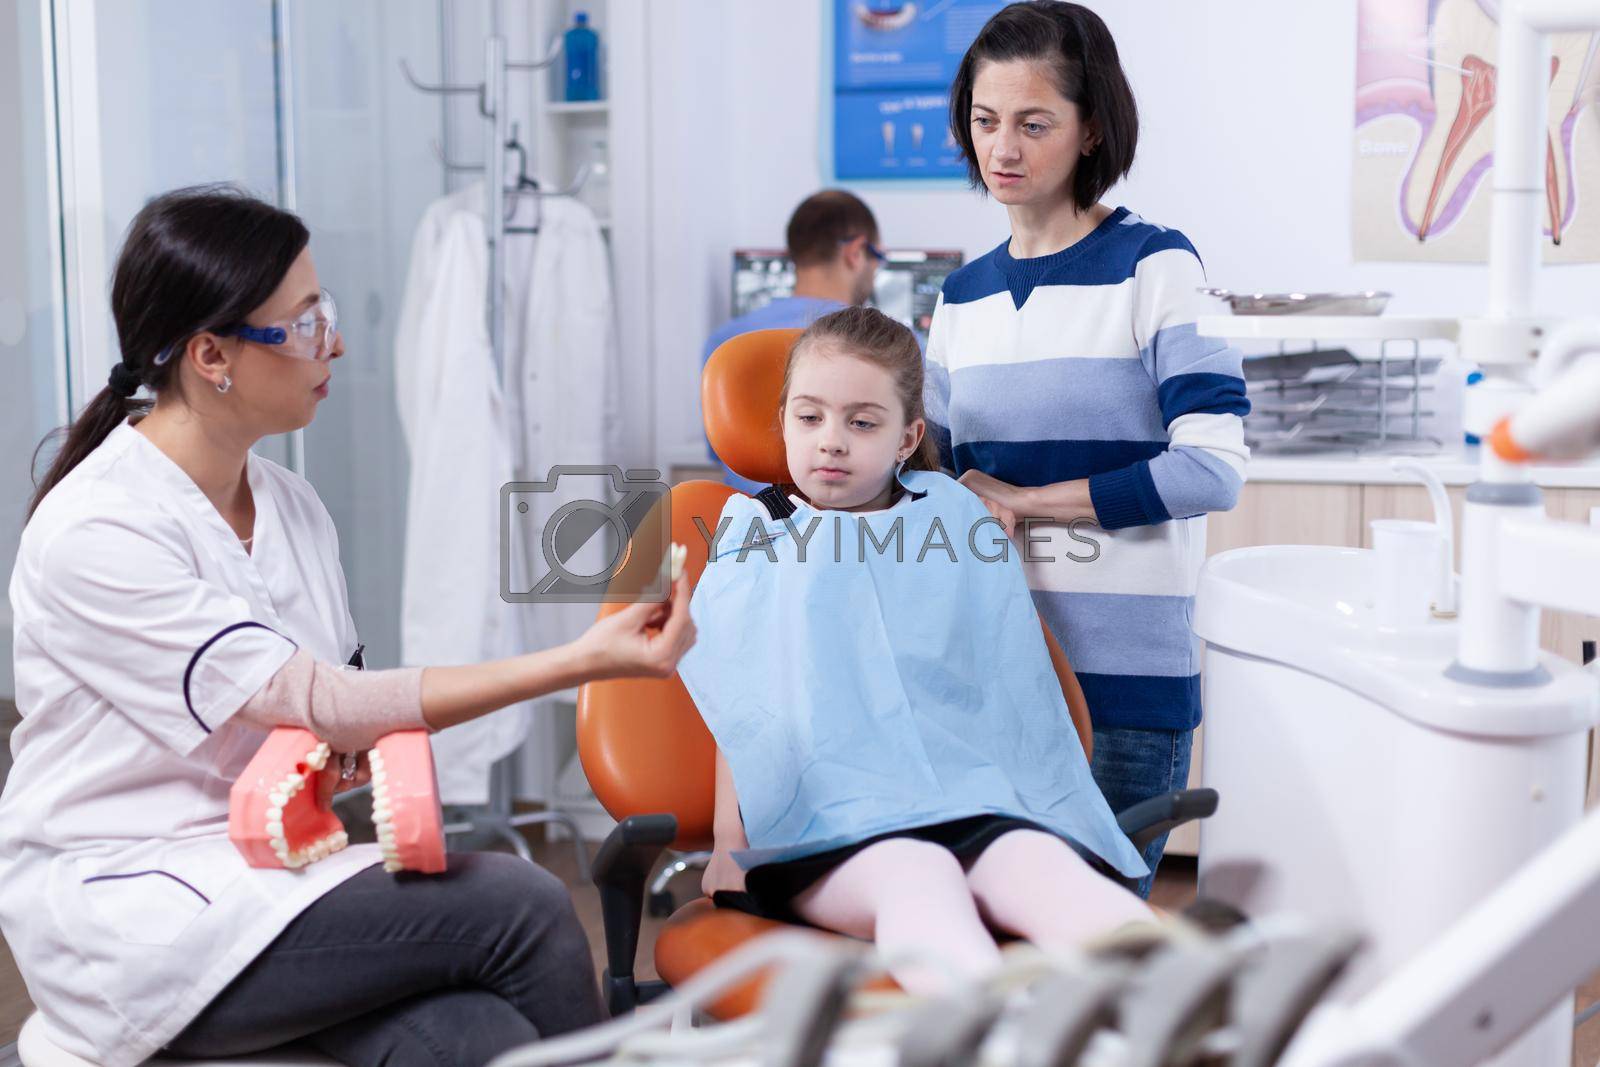 Child wearing dental bib sitting on chair while doctor is showing artificial teeth. Little girl and mother listening stomatolog talking about tooth hygine in dentistiry clinic holding jaw model.